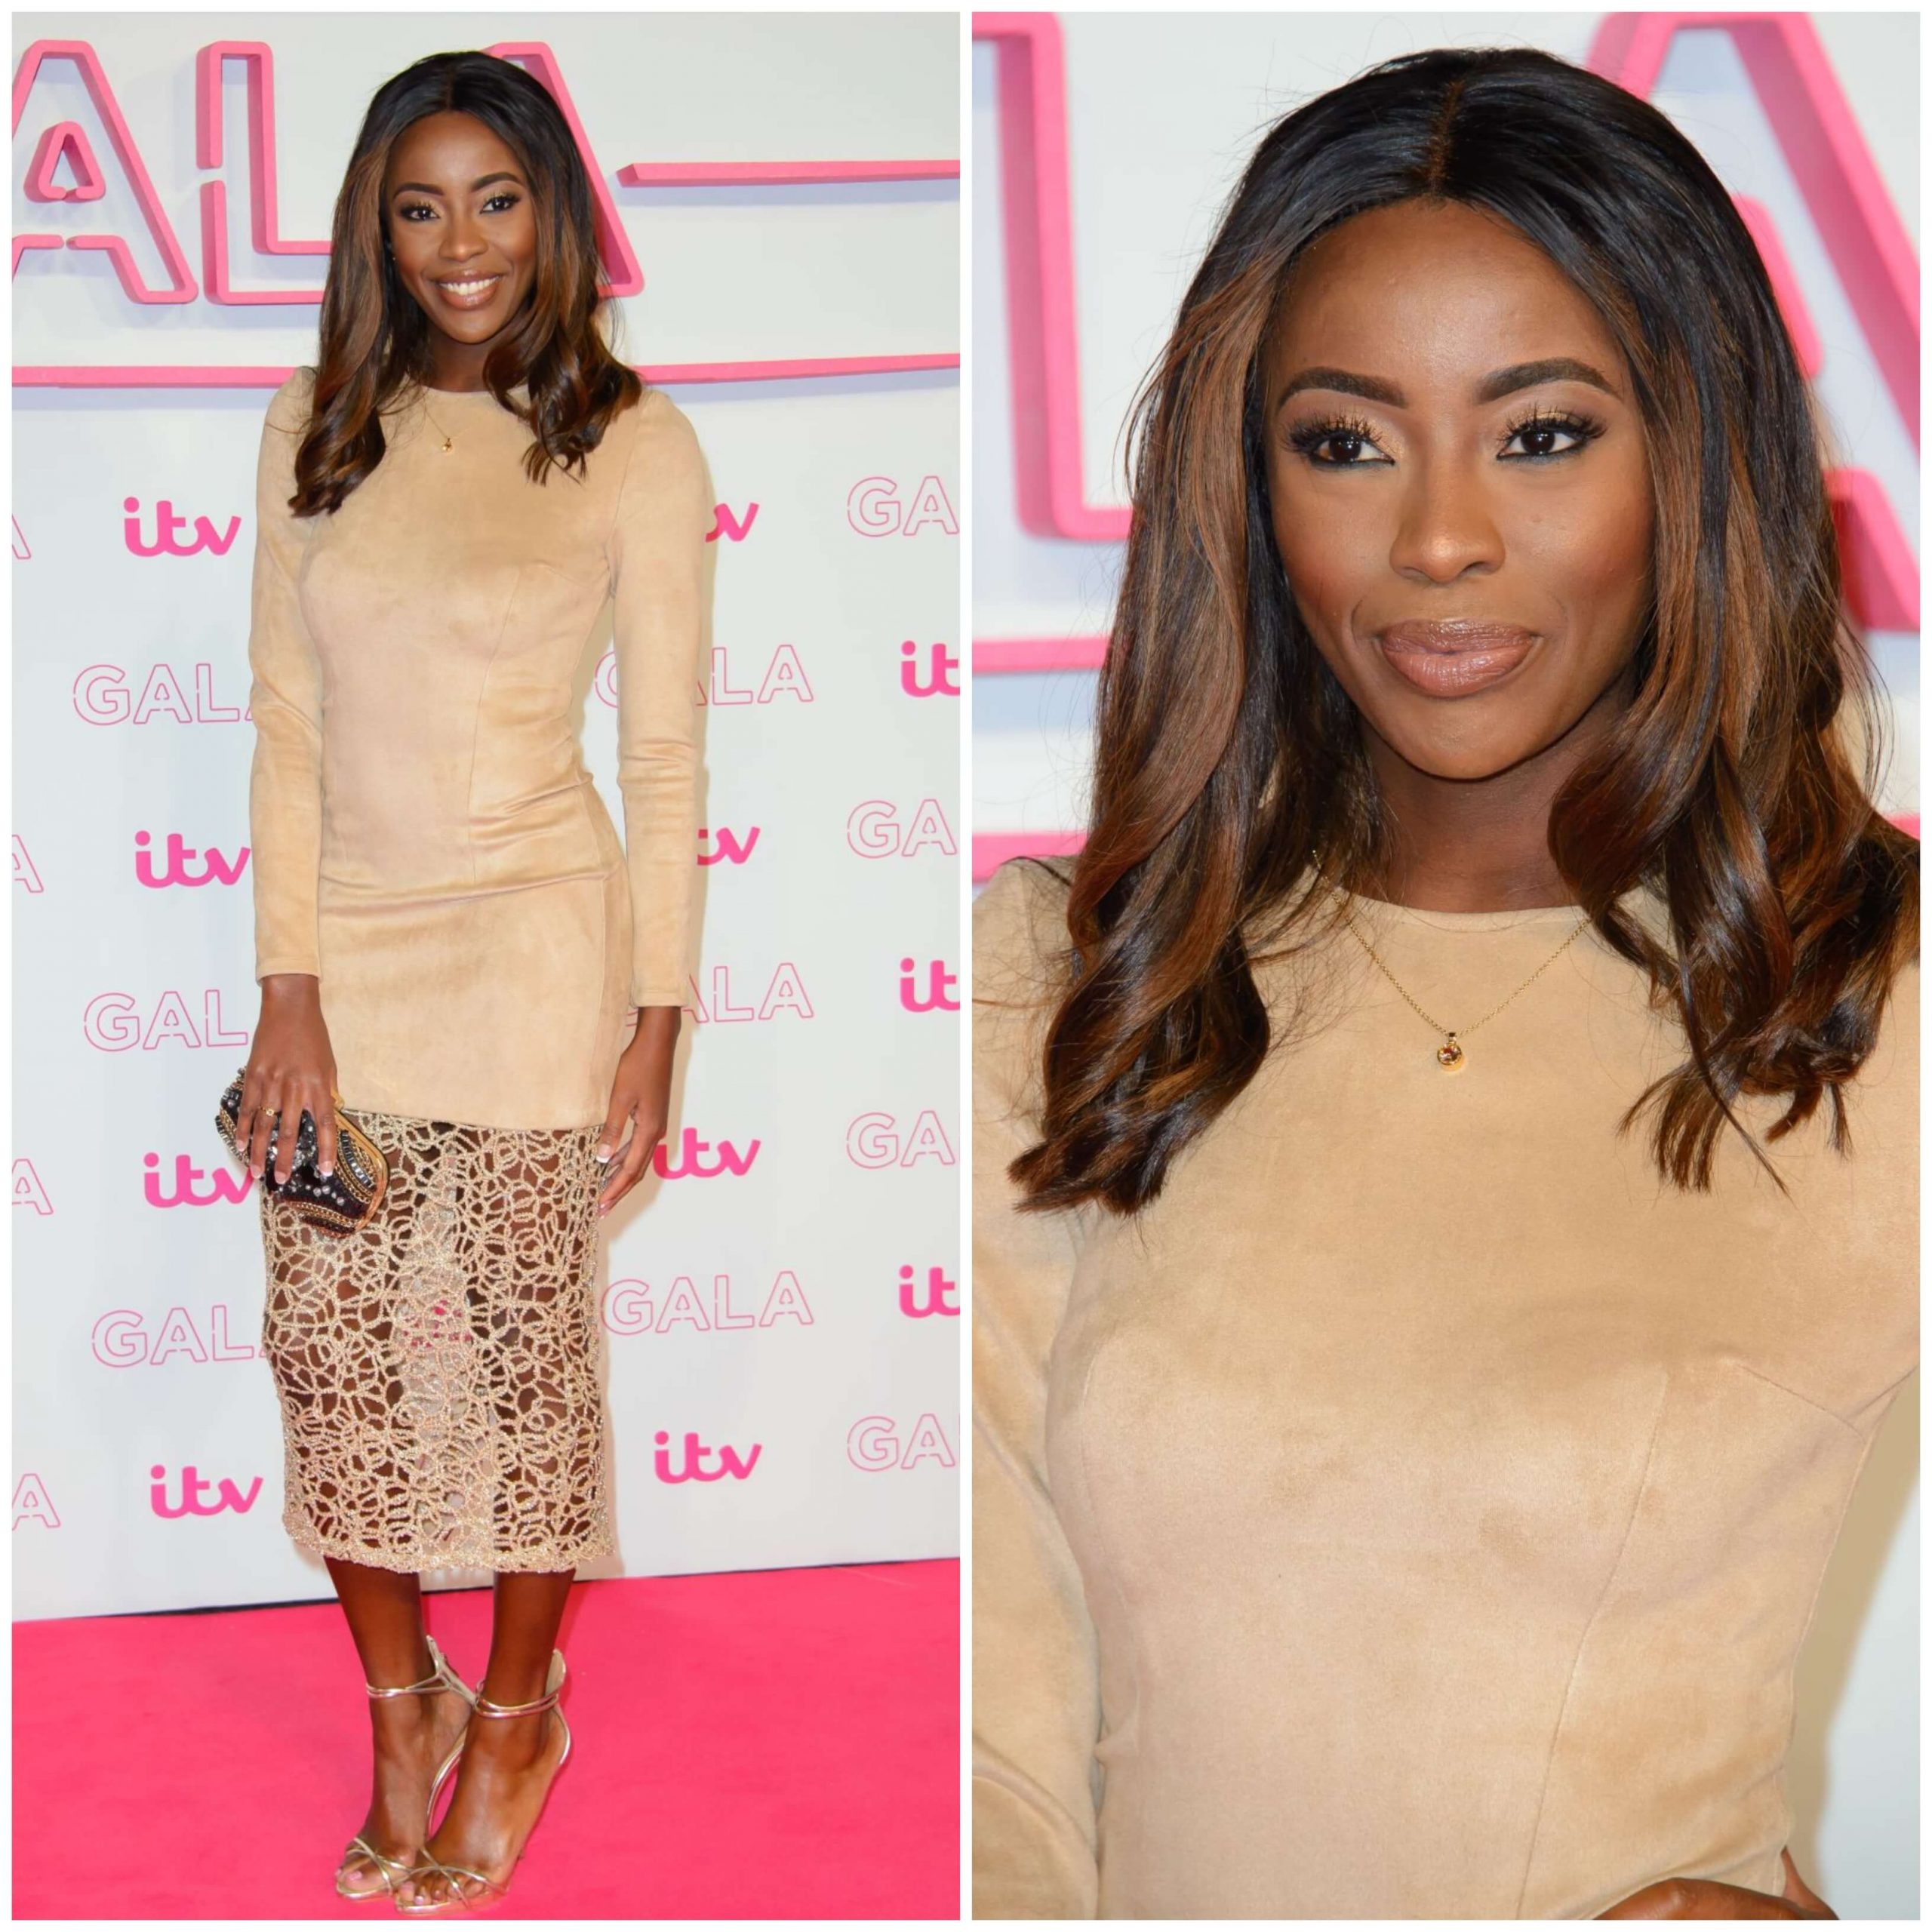 AJ Odudu – In An Off-White Full Sleeves Outfits -   ITV Gala 2016 in London Palladium Theatre